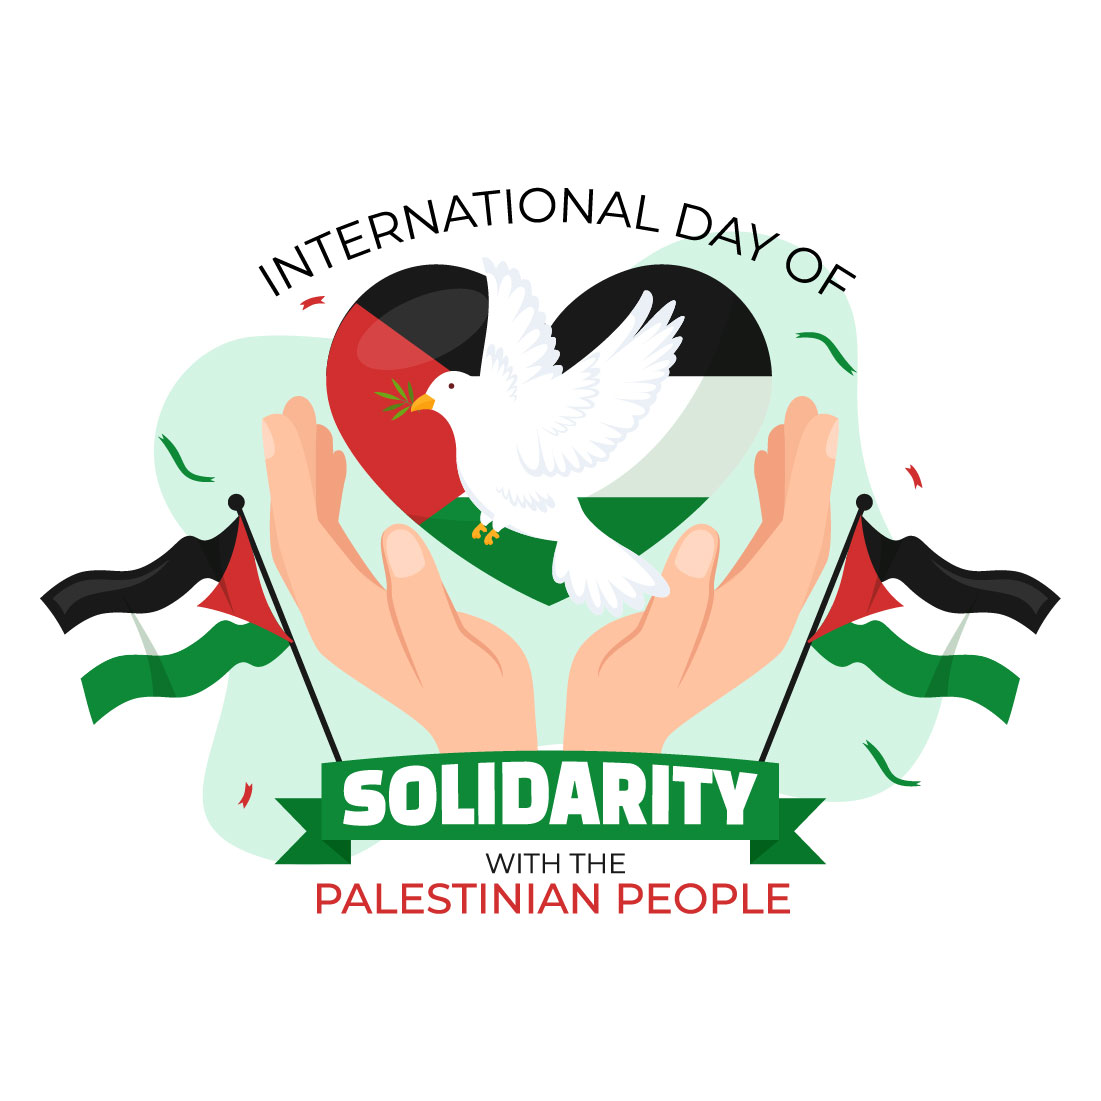 12 International Day of Solidarity with the Palestinian People Illustration cover image.